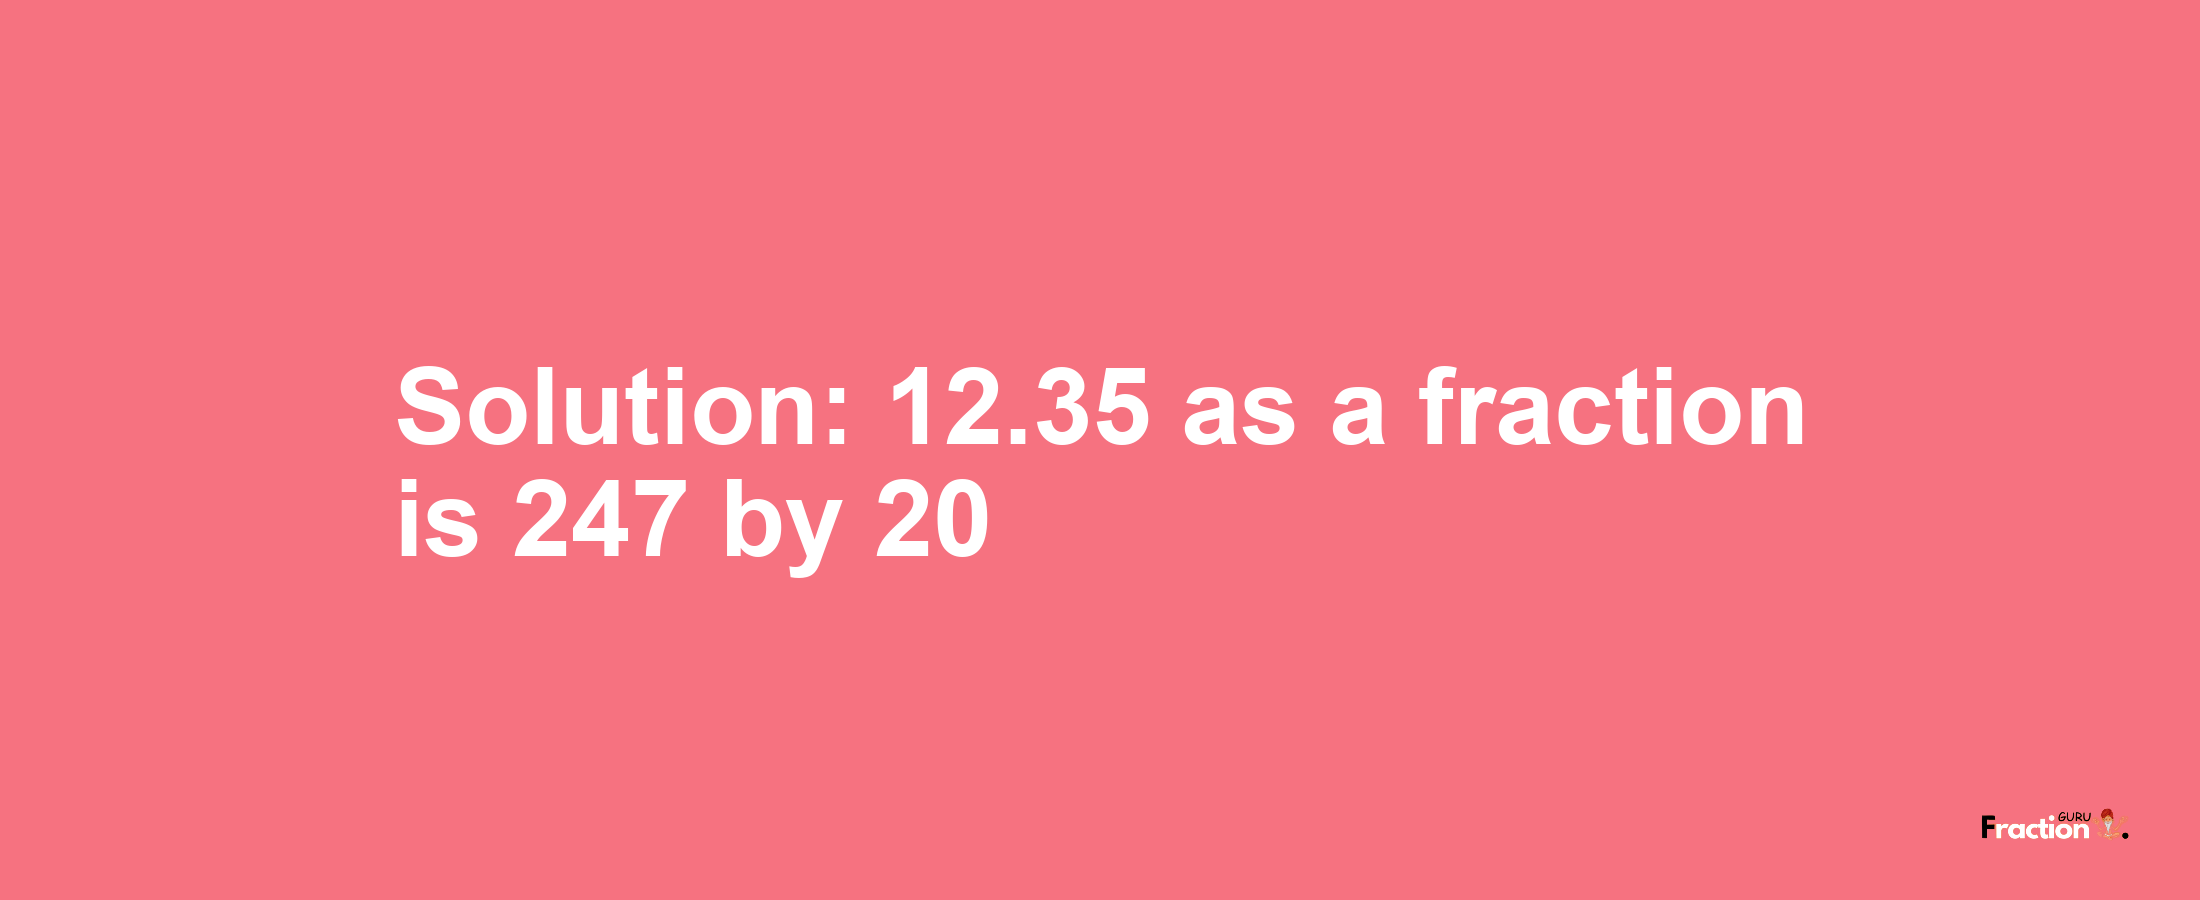 Solution:12.35 as a fraction is 247/20